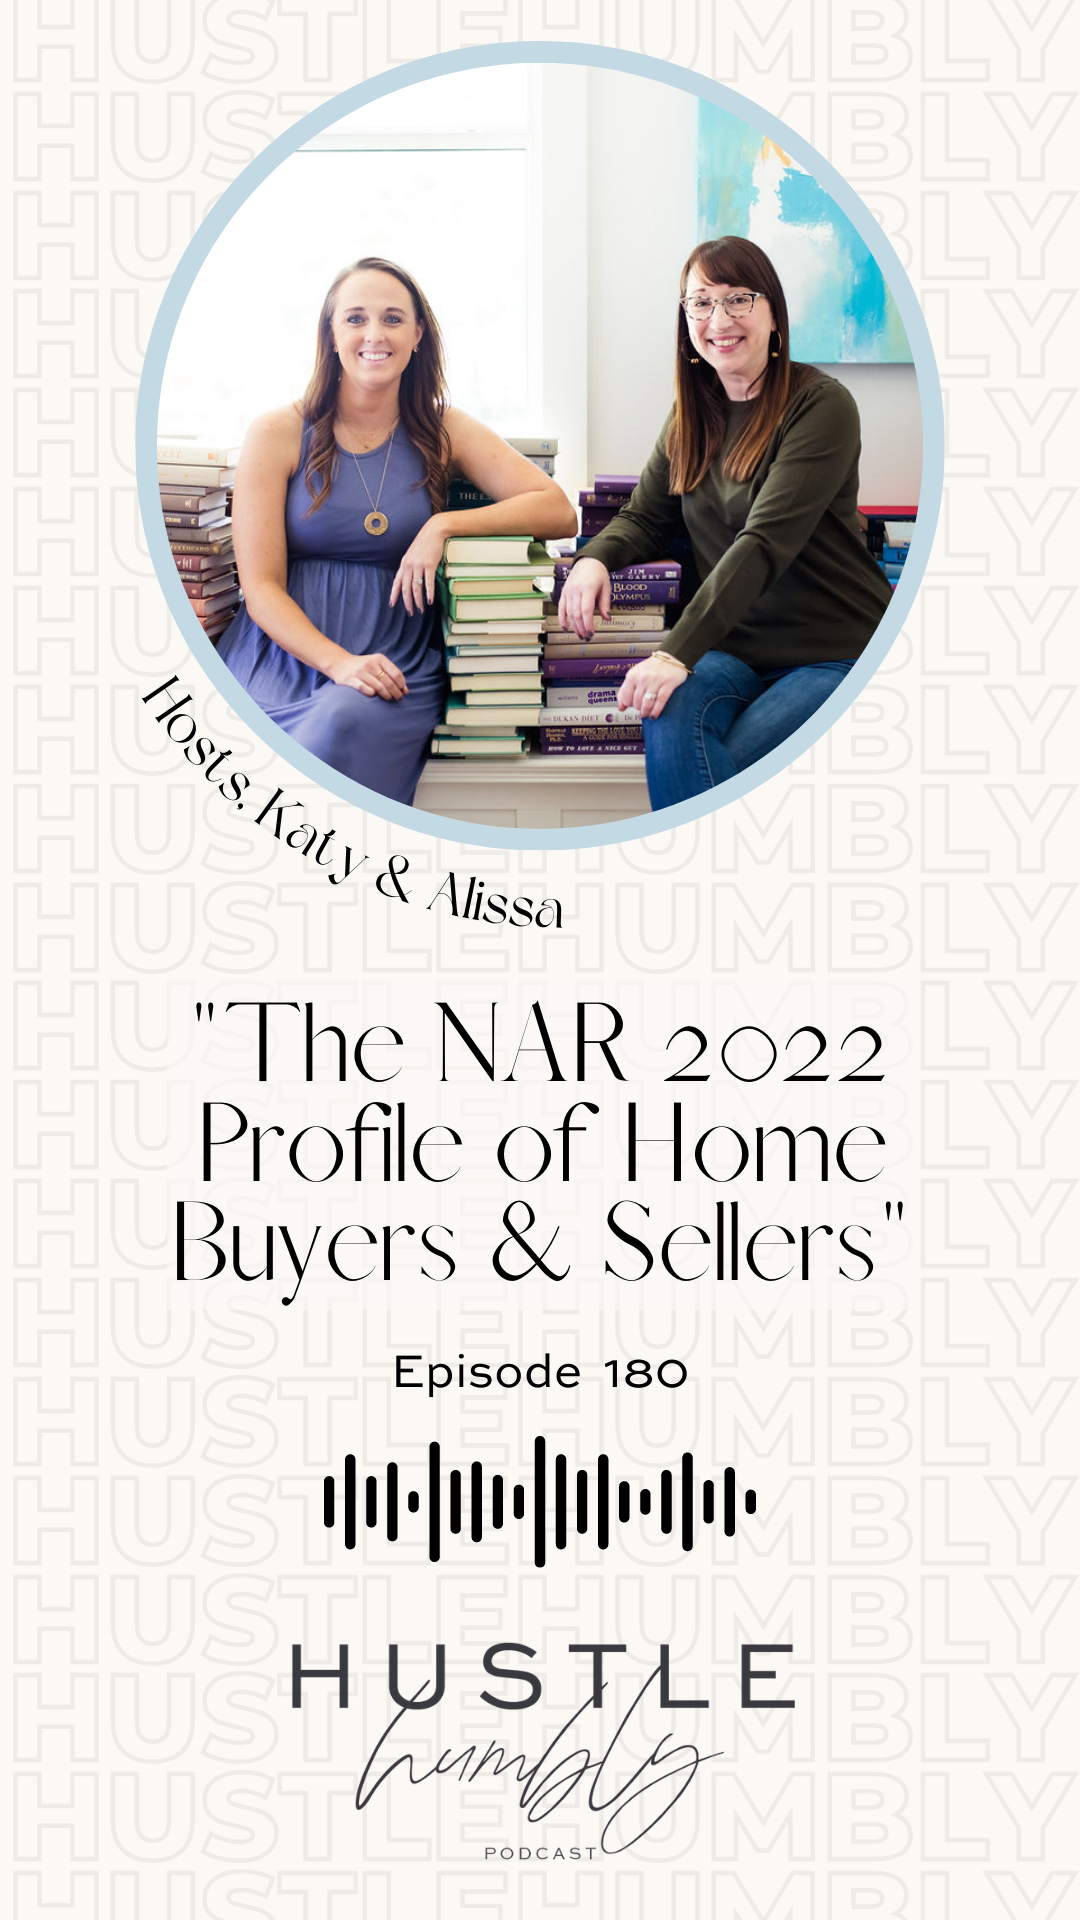 Two realtors discussing the 2022 NAR Profile of Home Buyers and Sellers.